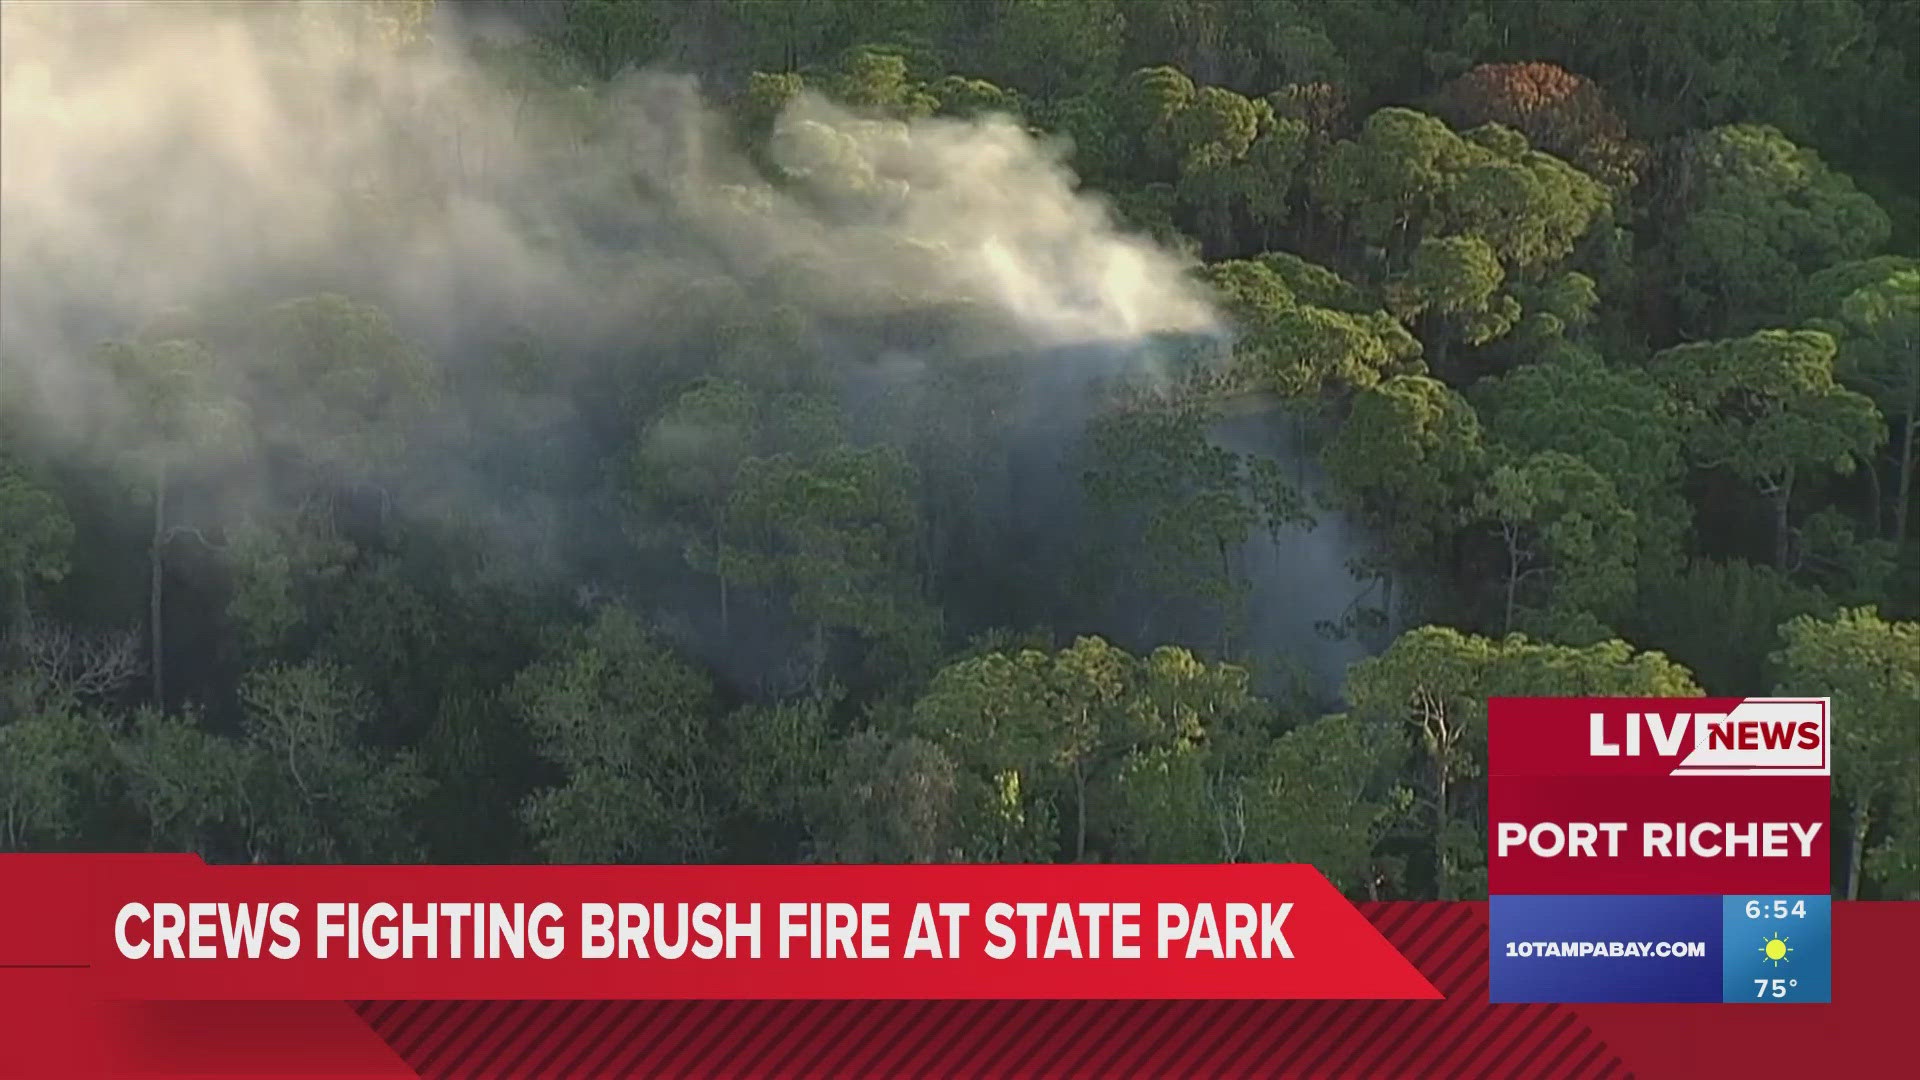 Firefighters are battling a brush fire at the Werner-Boyce Salt Spring State Park.